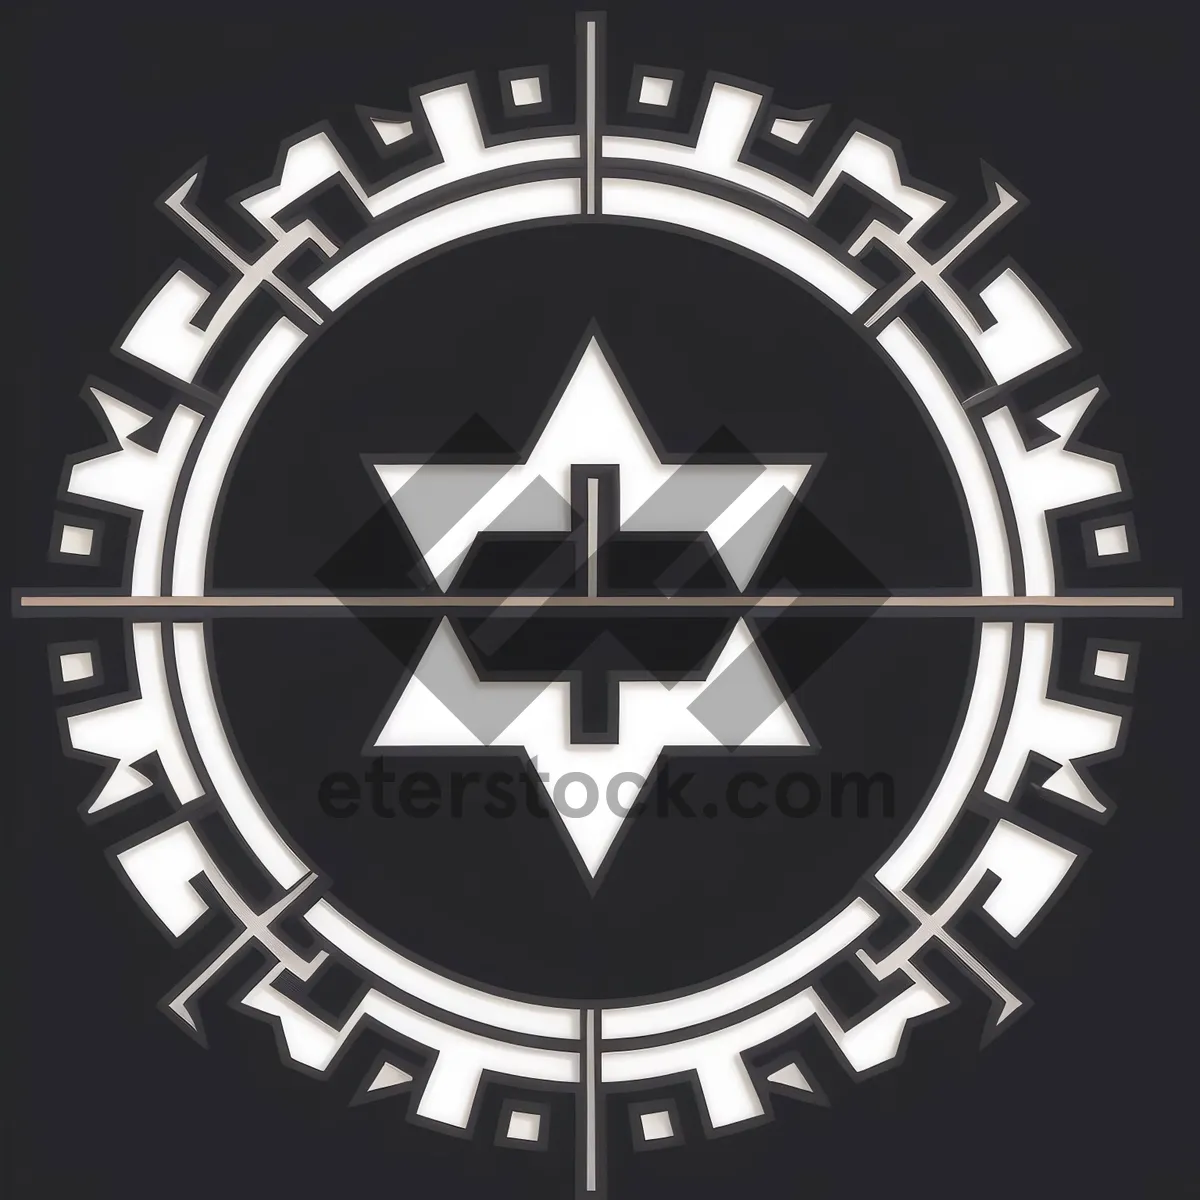 Picture of Symbolic Icon for Facility Design: Star Gear Circle Stamp